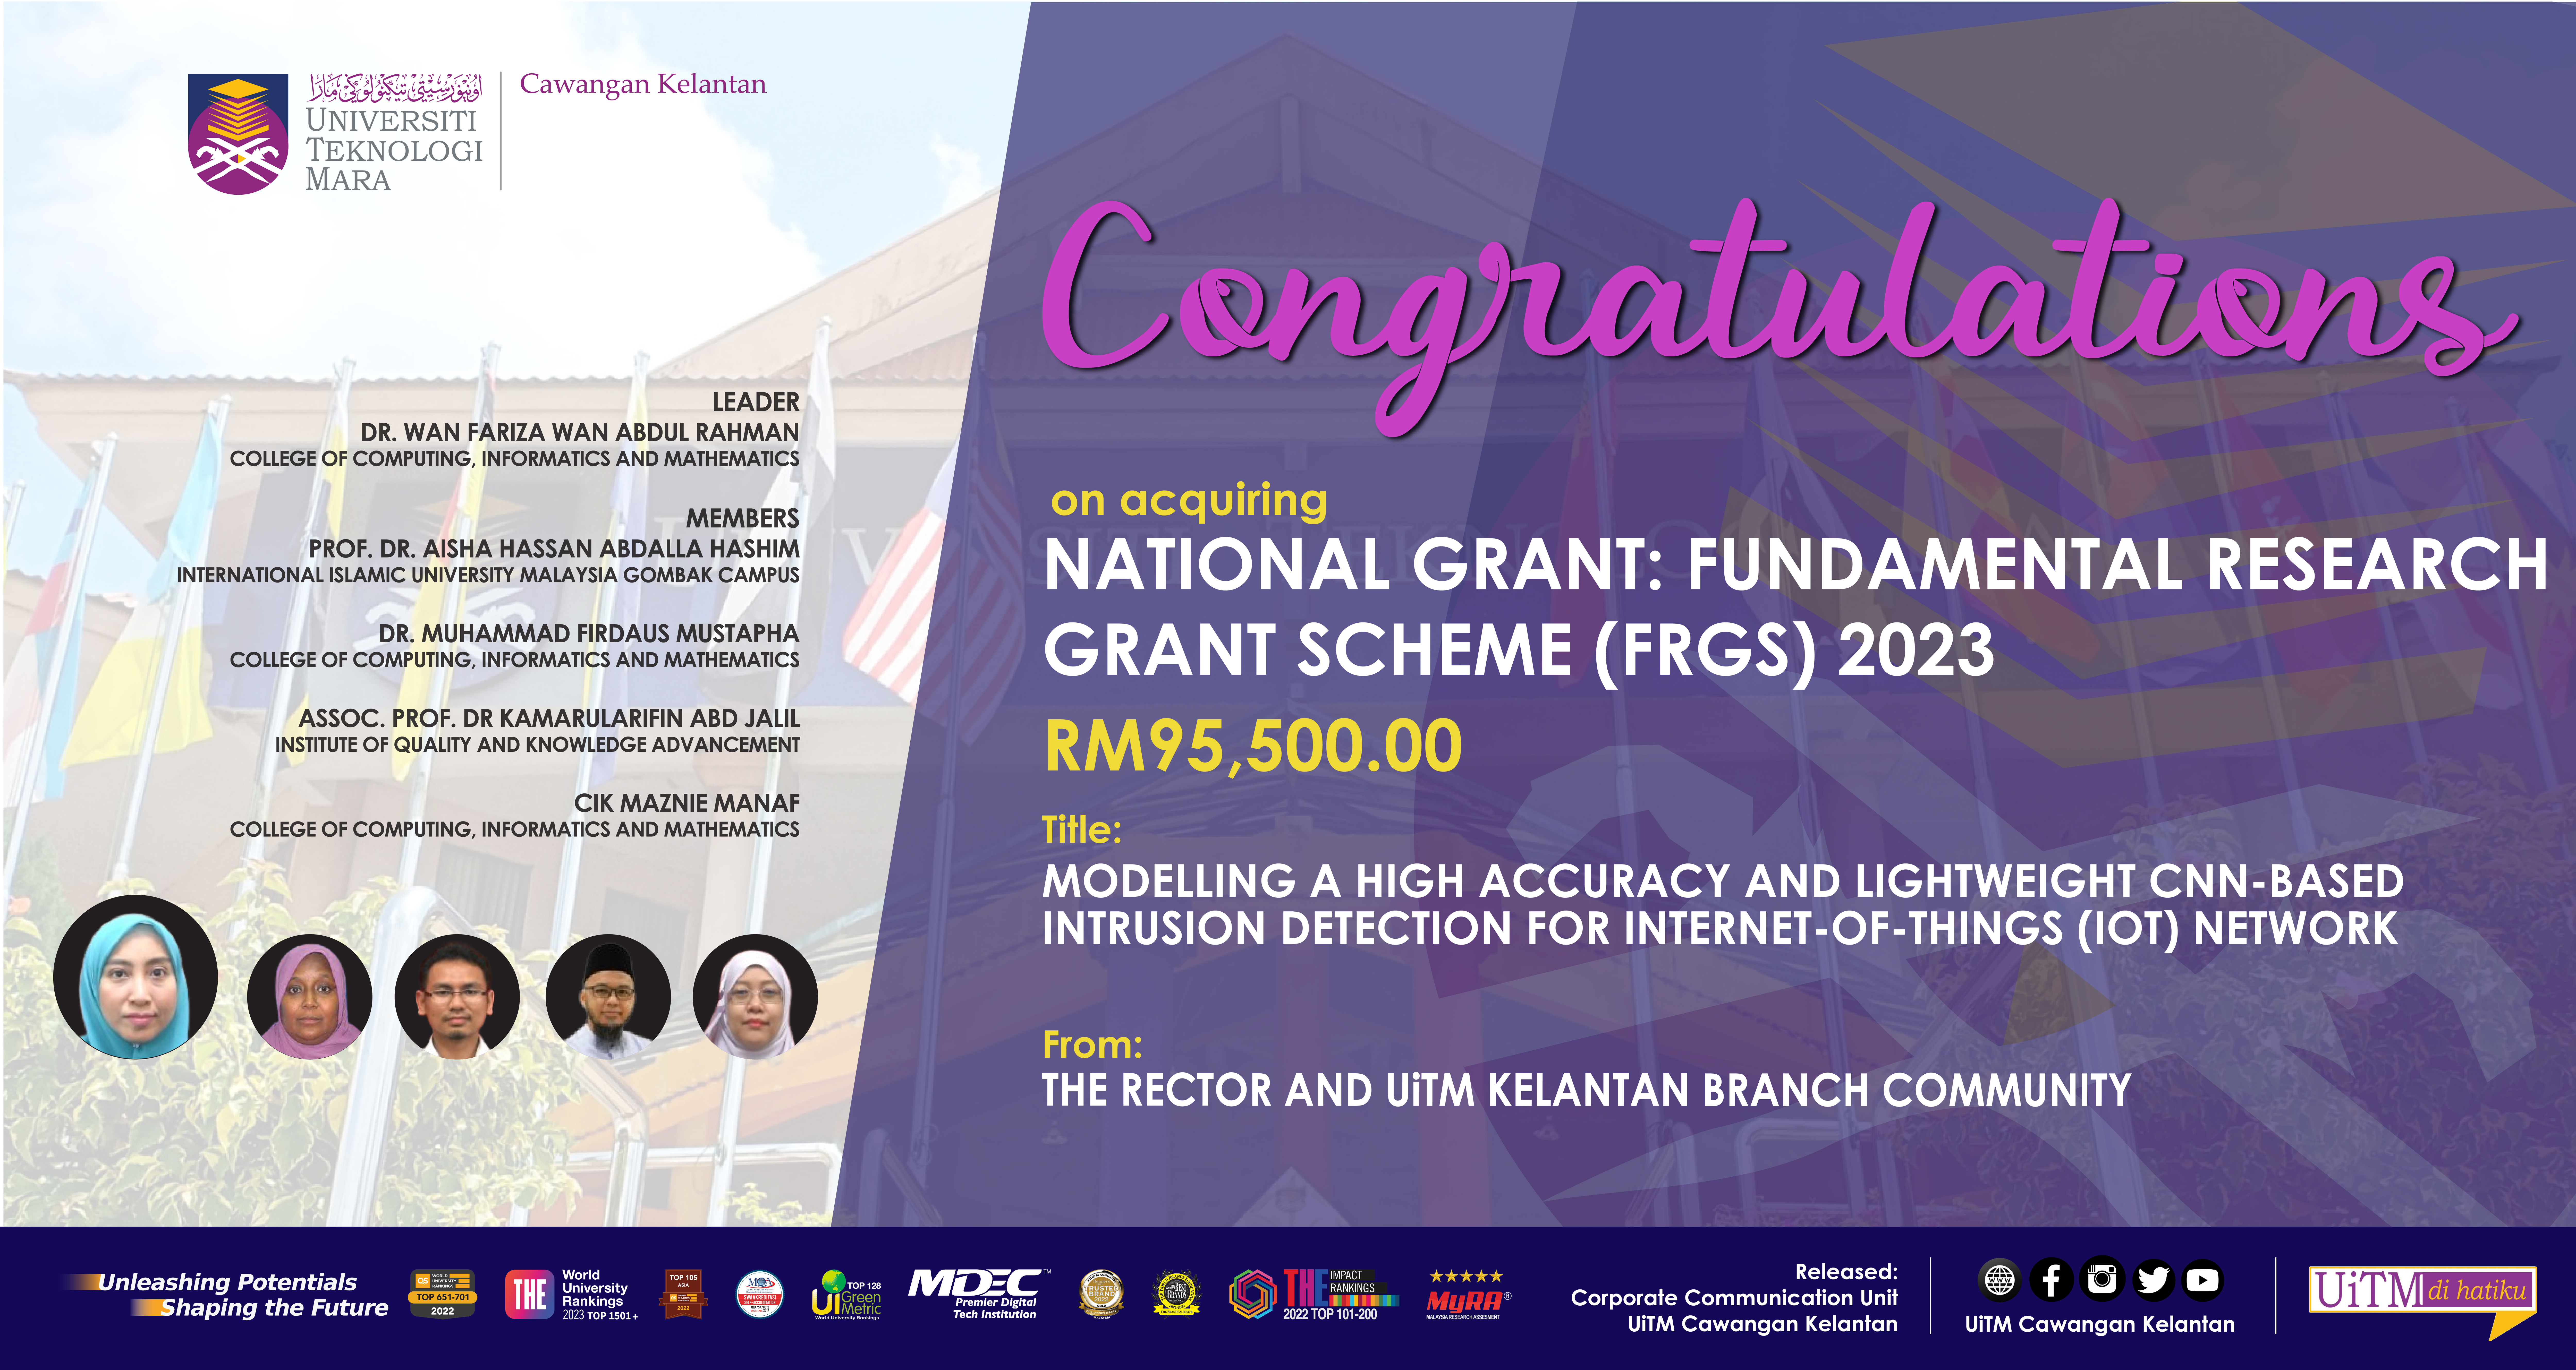 Congratulations!!! National Grant: Fundamental Research Grant Scheme (FRGS) 2023 (Modelling a High Accuracy And Lightweight CNN-based Intrusion Detection For Internet-Of-Thigs (IOT) Network)